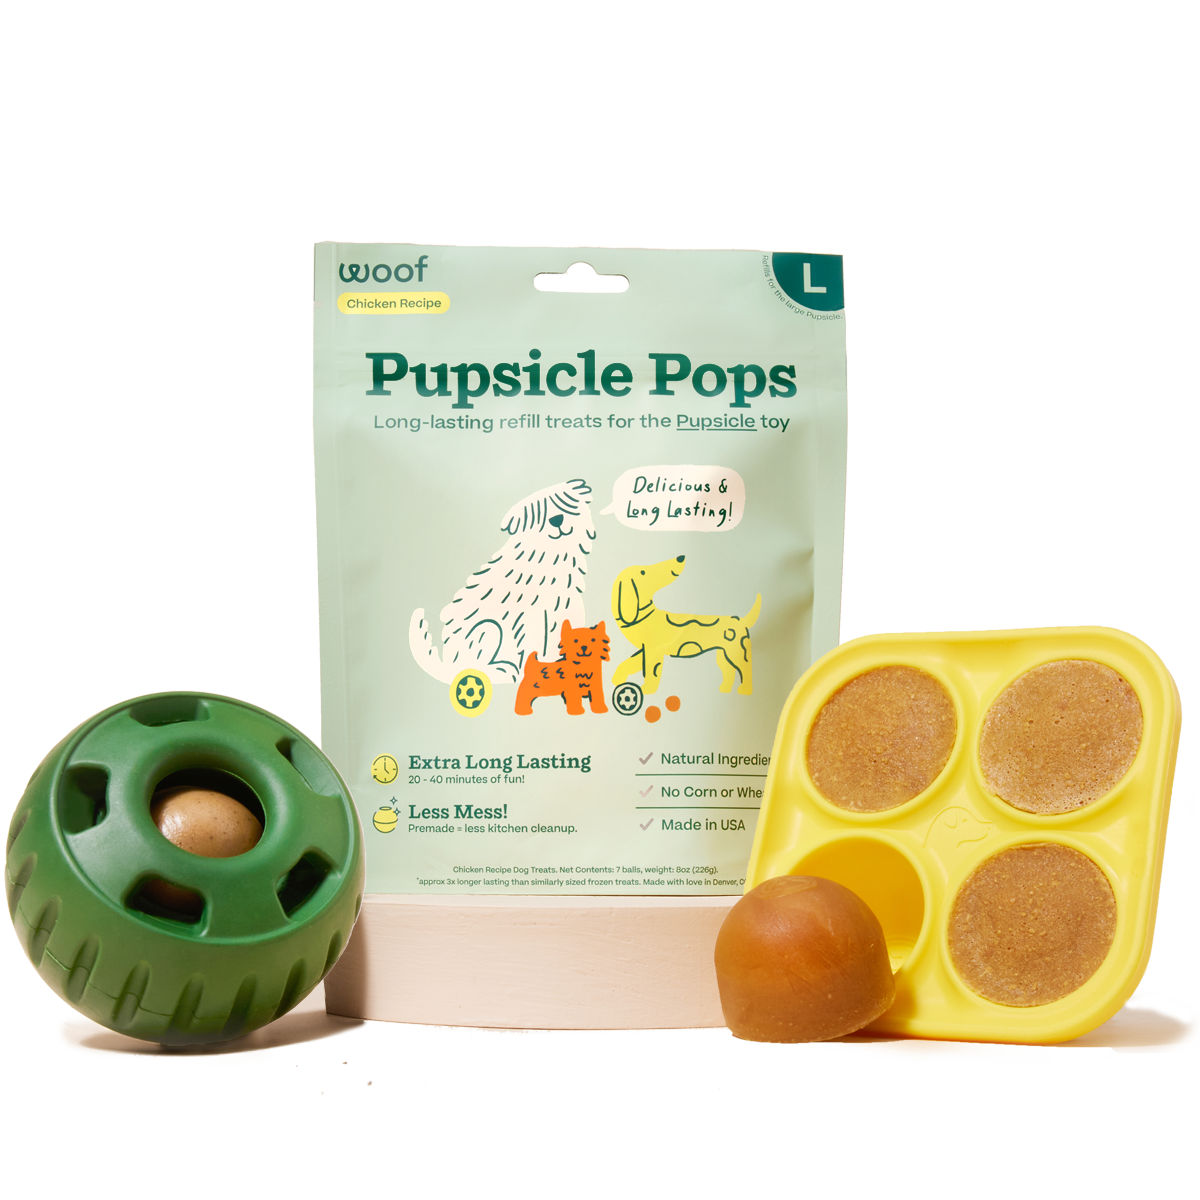 Woof Pupsicle Starter Pack Small - Dogs 5-25 lbs - Includes: Pupsicle Pops, DIY Treat Tray, 60 Day Warranty, Durable, Safe, Dog Gift